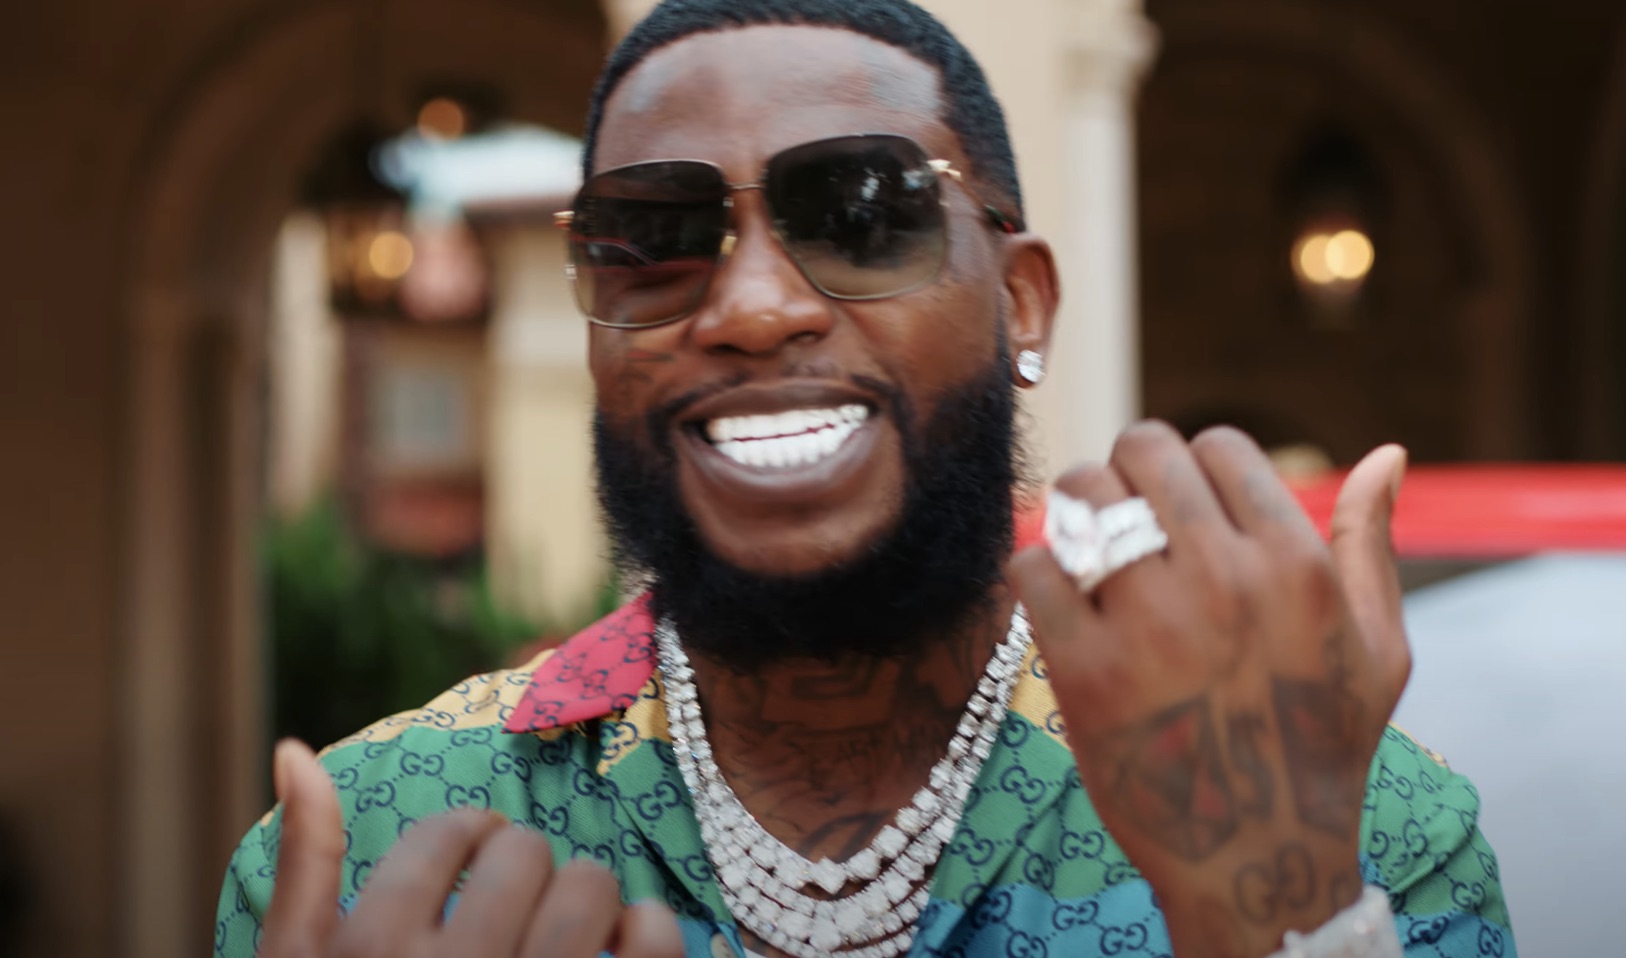 Gucci and Gucci Mane are teaming up for a collaboration that no